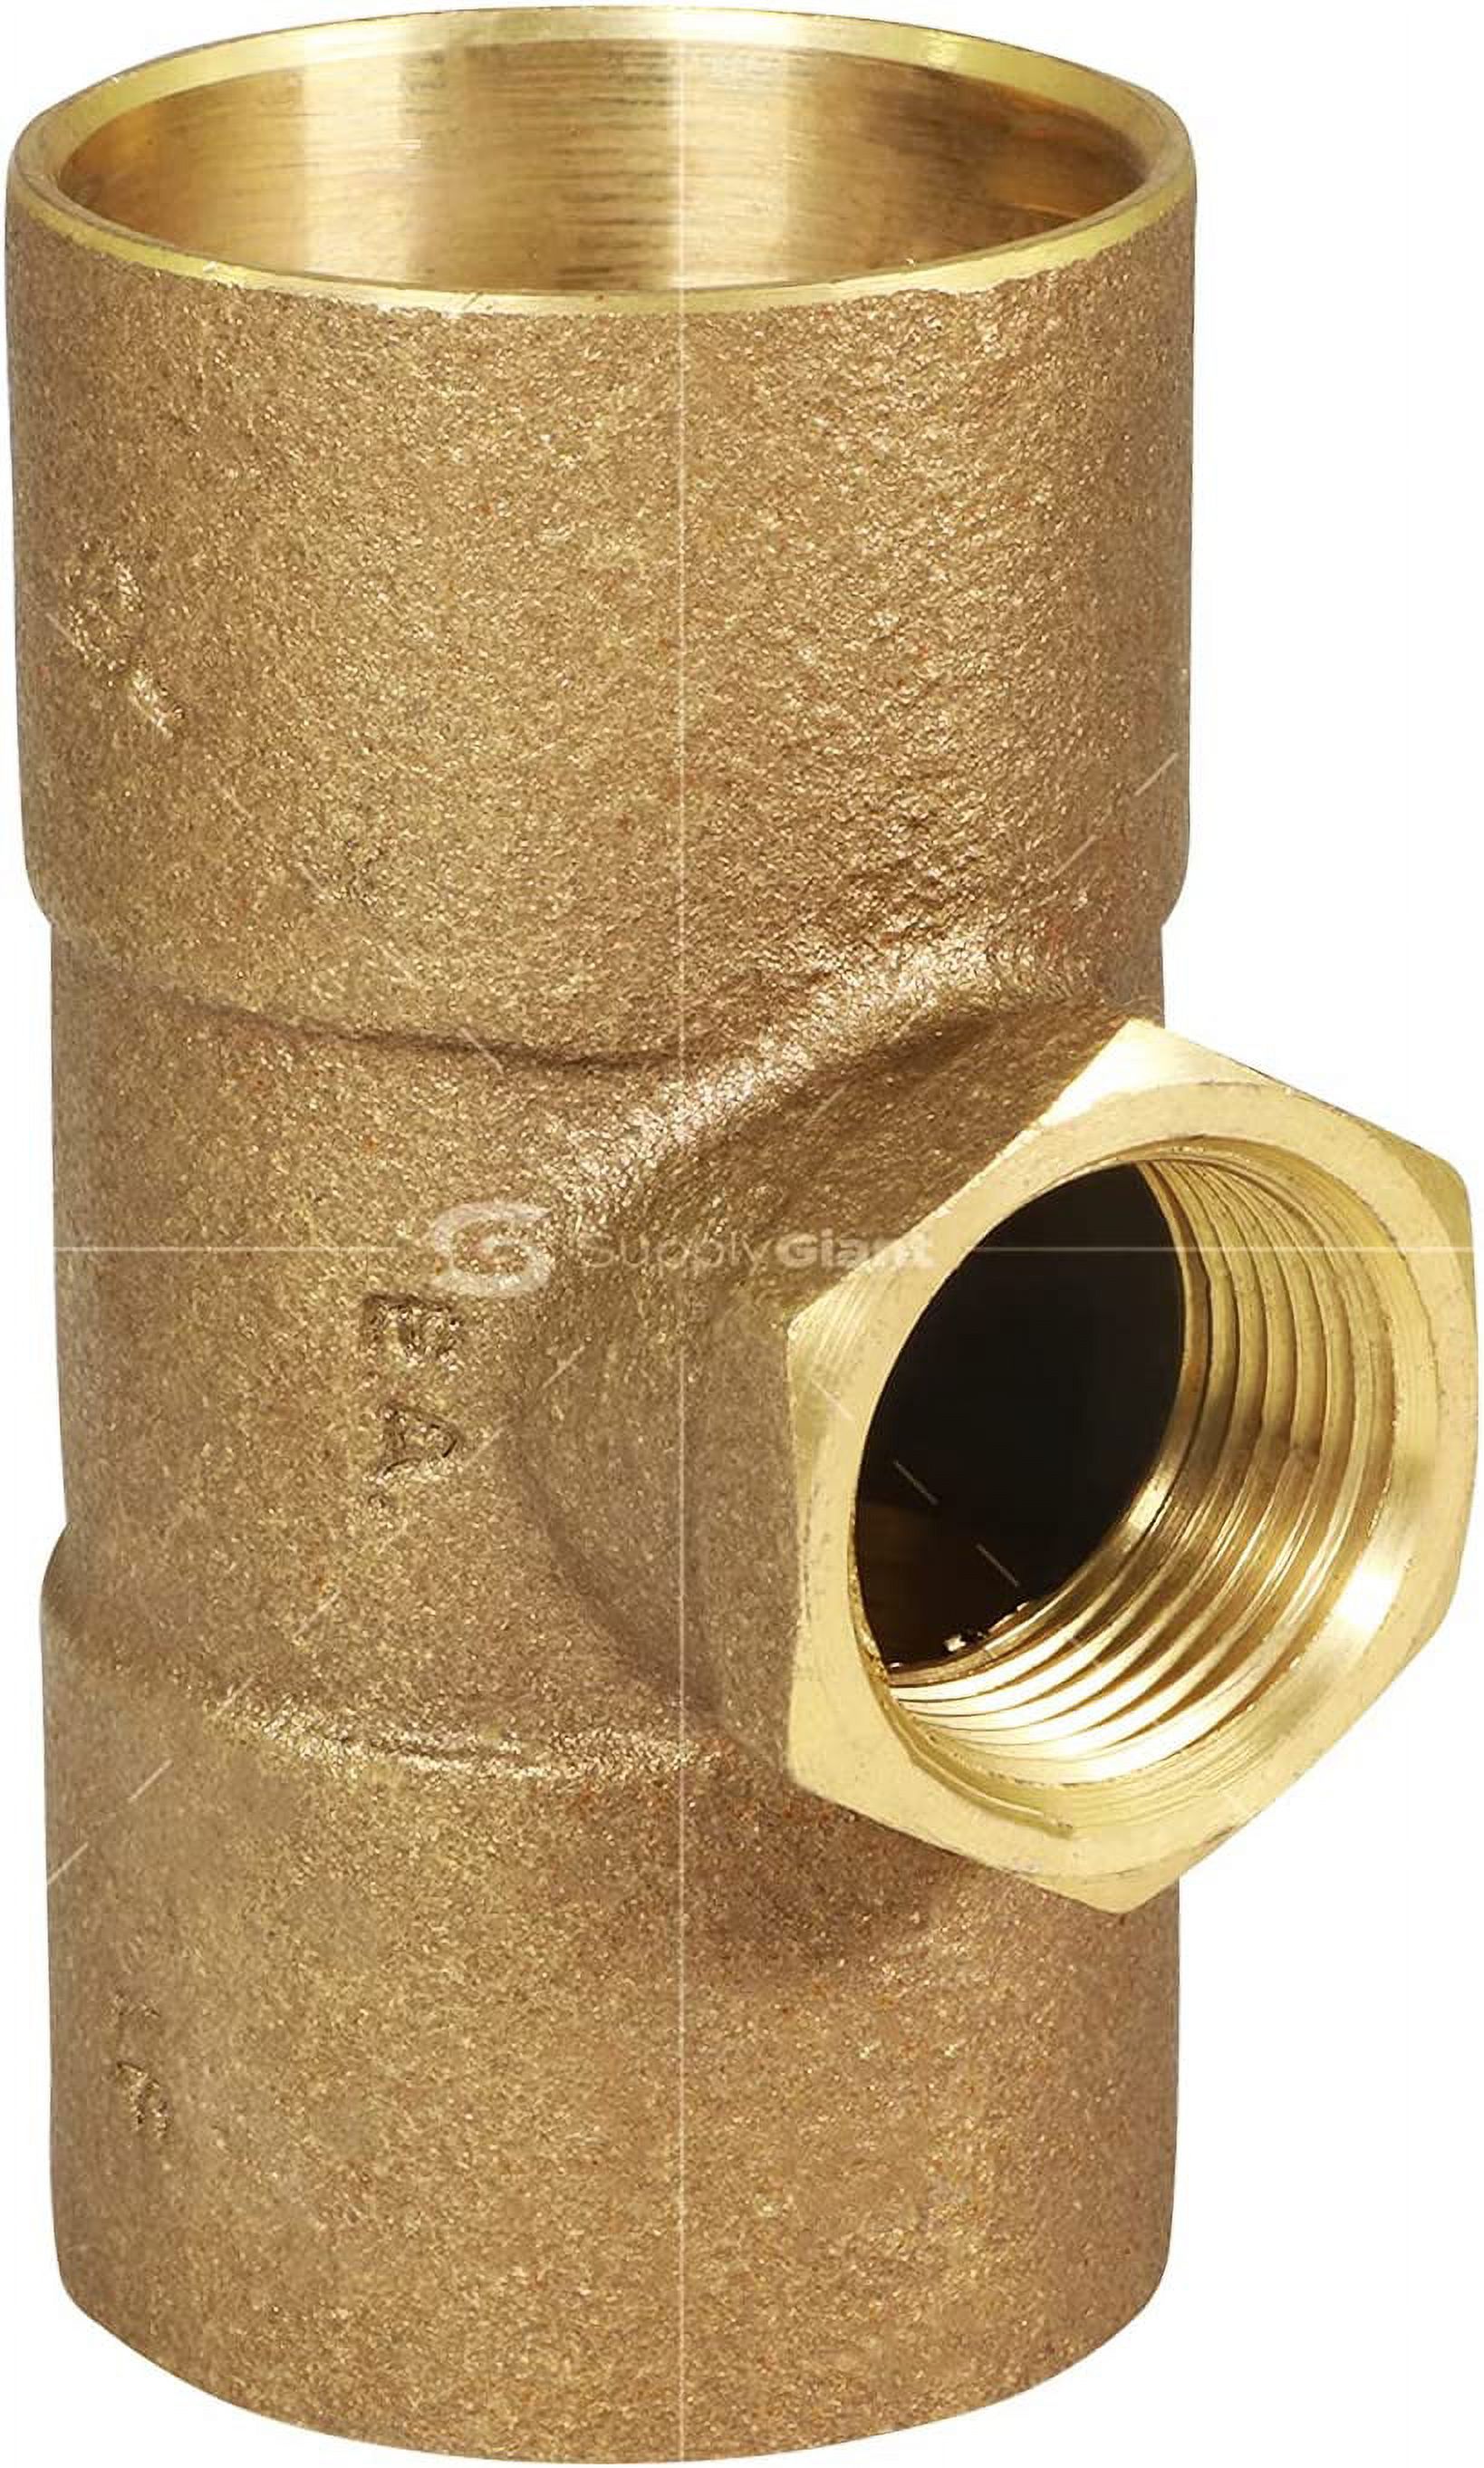 Supply Giant CCFT1213-NL CXCXF Lead Free Cast Brass Tee Fitting with Solder Cups and Female Threaded Branch, 1-1/2" x 1-1/2" x 3/4" - image 3 of 6